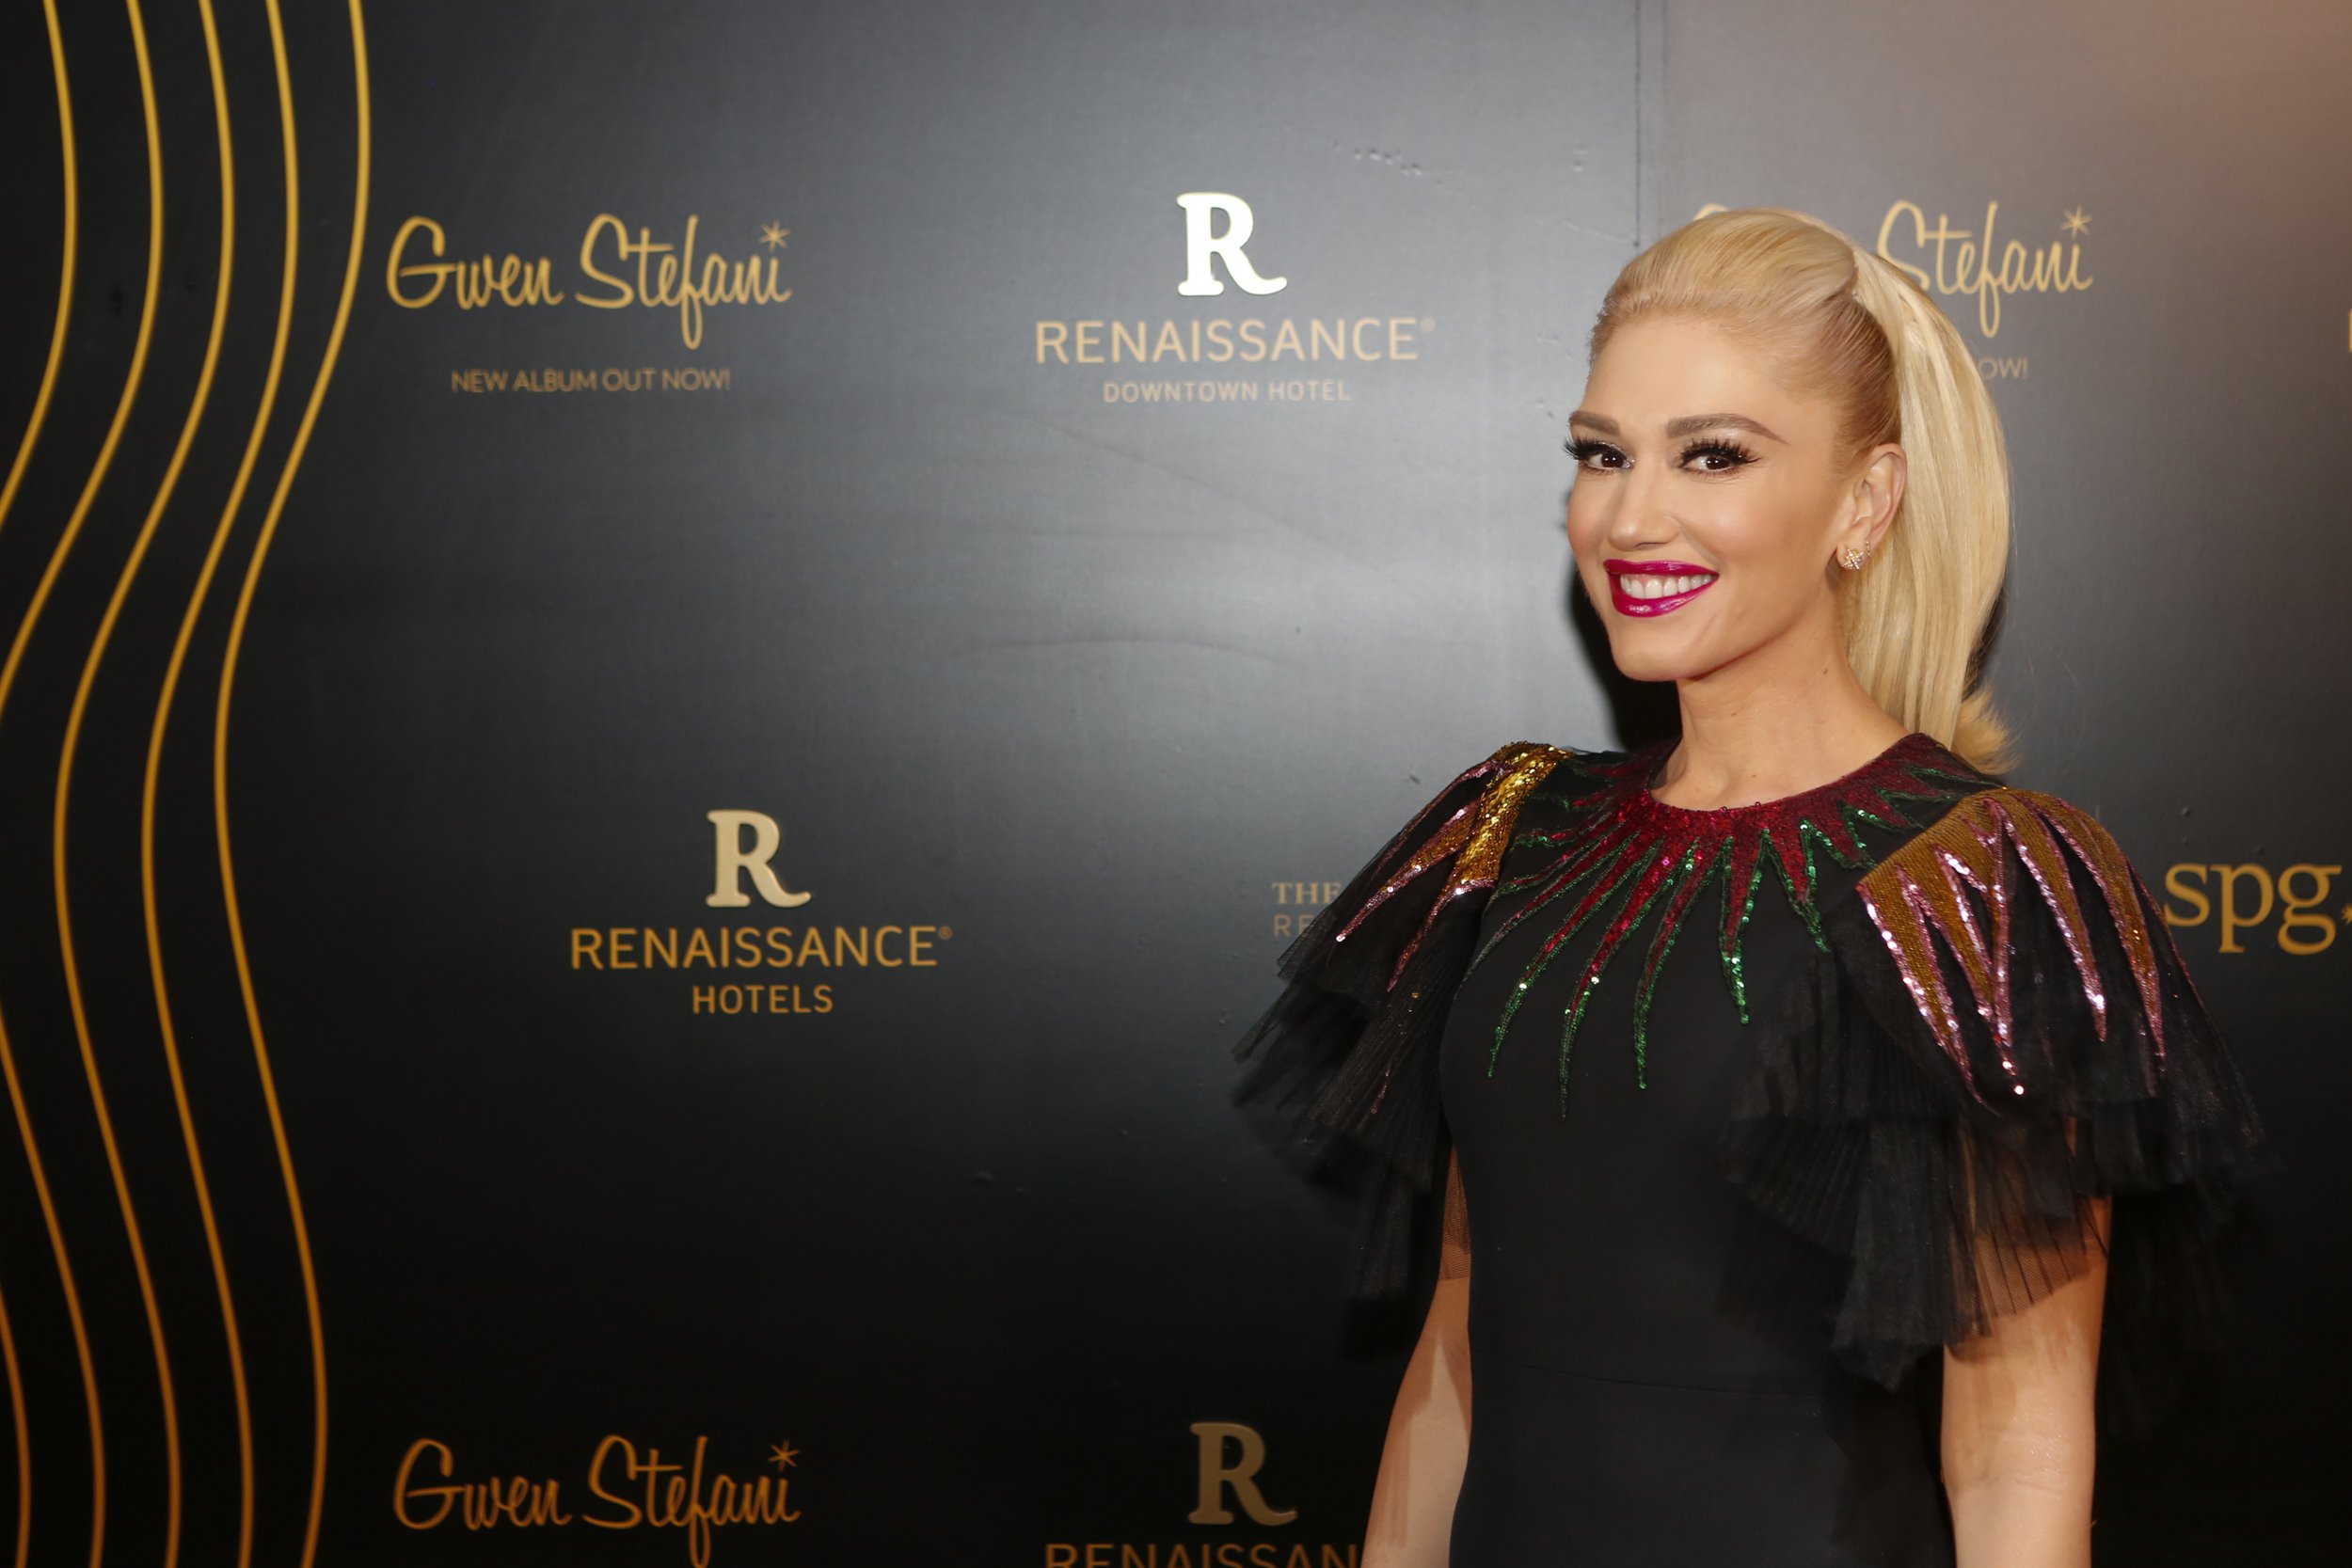 Gwen Stefani attends the opening of the Renaissance Downtown Hotel, Dubai on December 4, 2017. | Photo: Getty Images